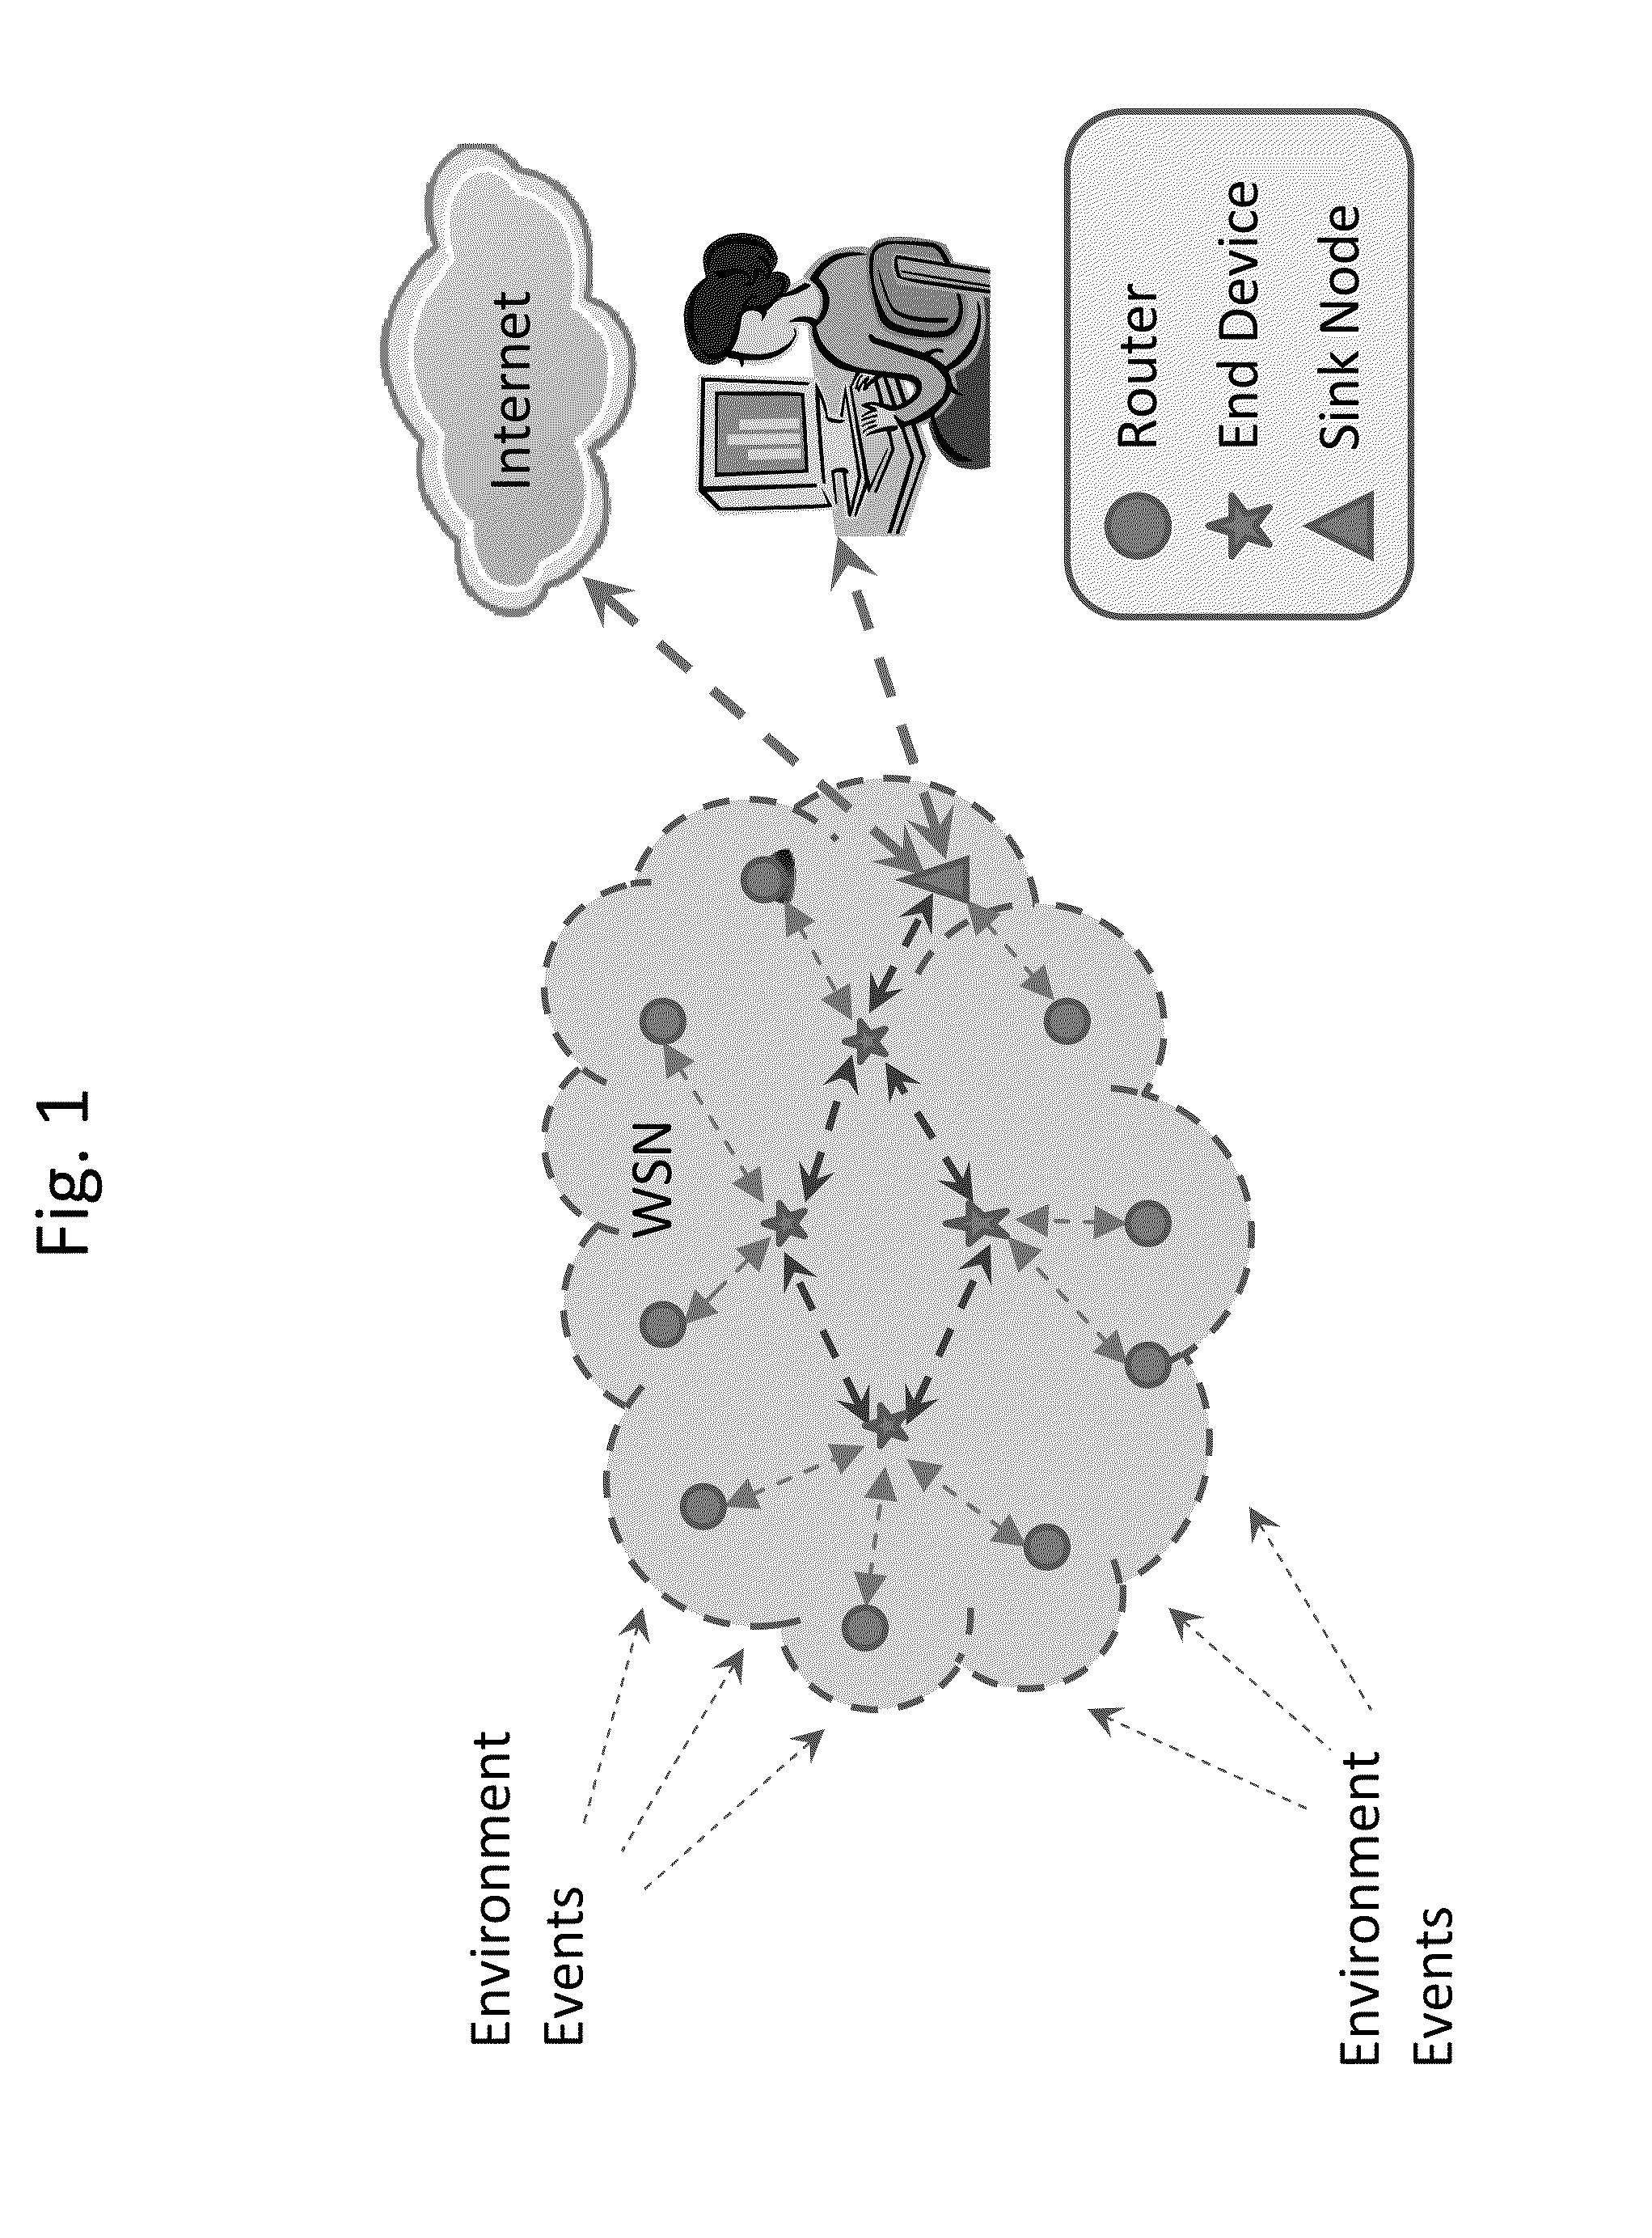 Hybrid routing and forwarding solution for a wireless sensor network